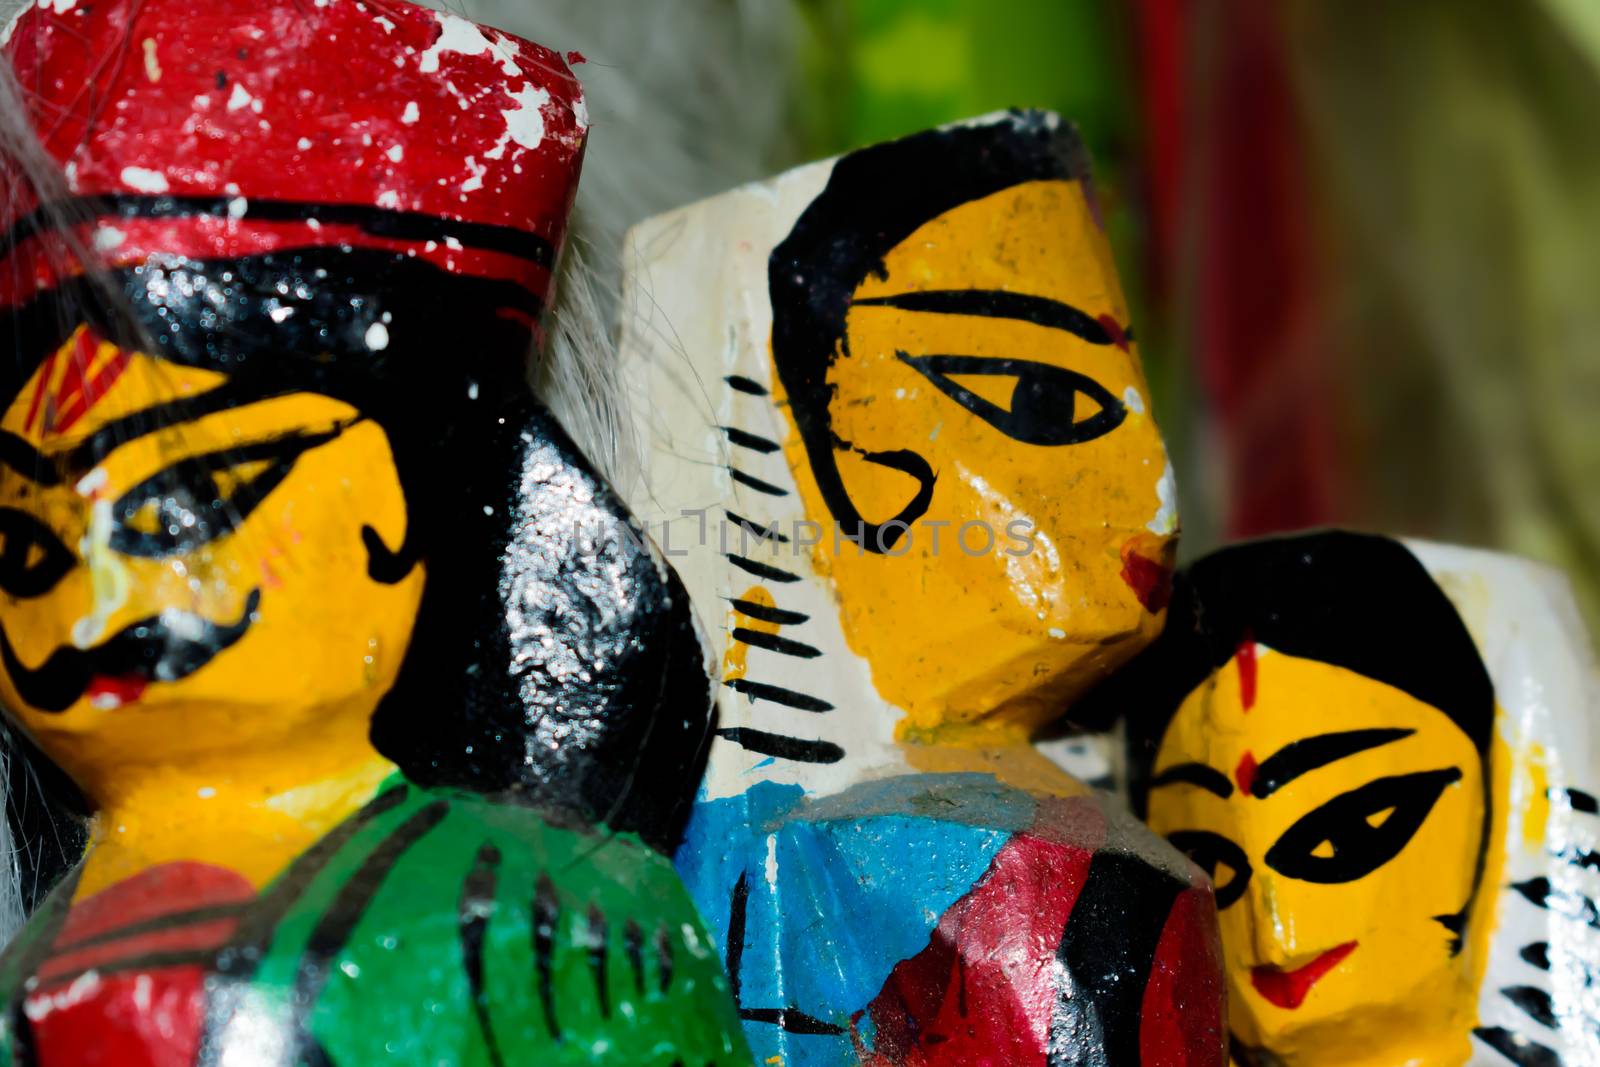 Dolls toys handmade souvenirs at the exhibition of folk arts by sudiptabhowmick